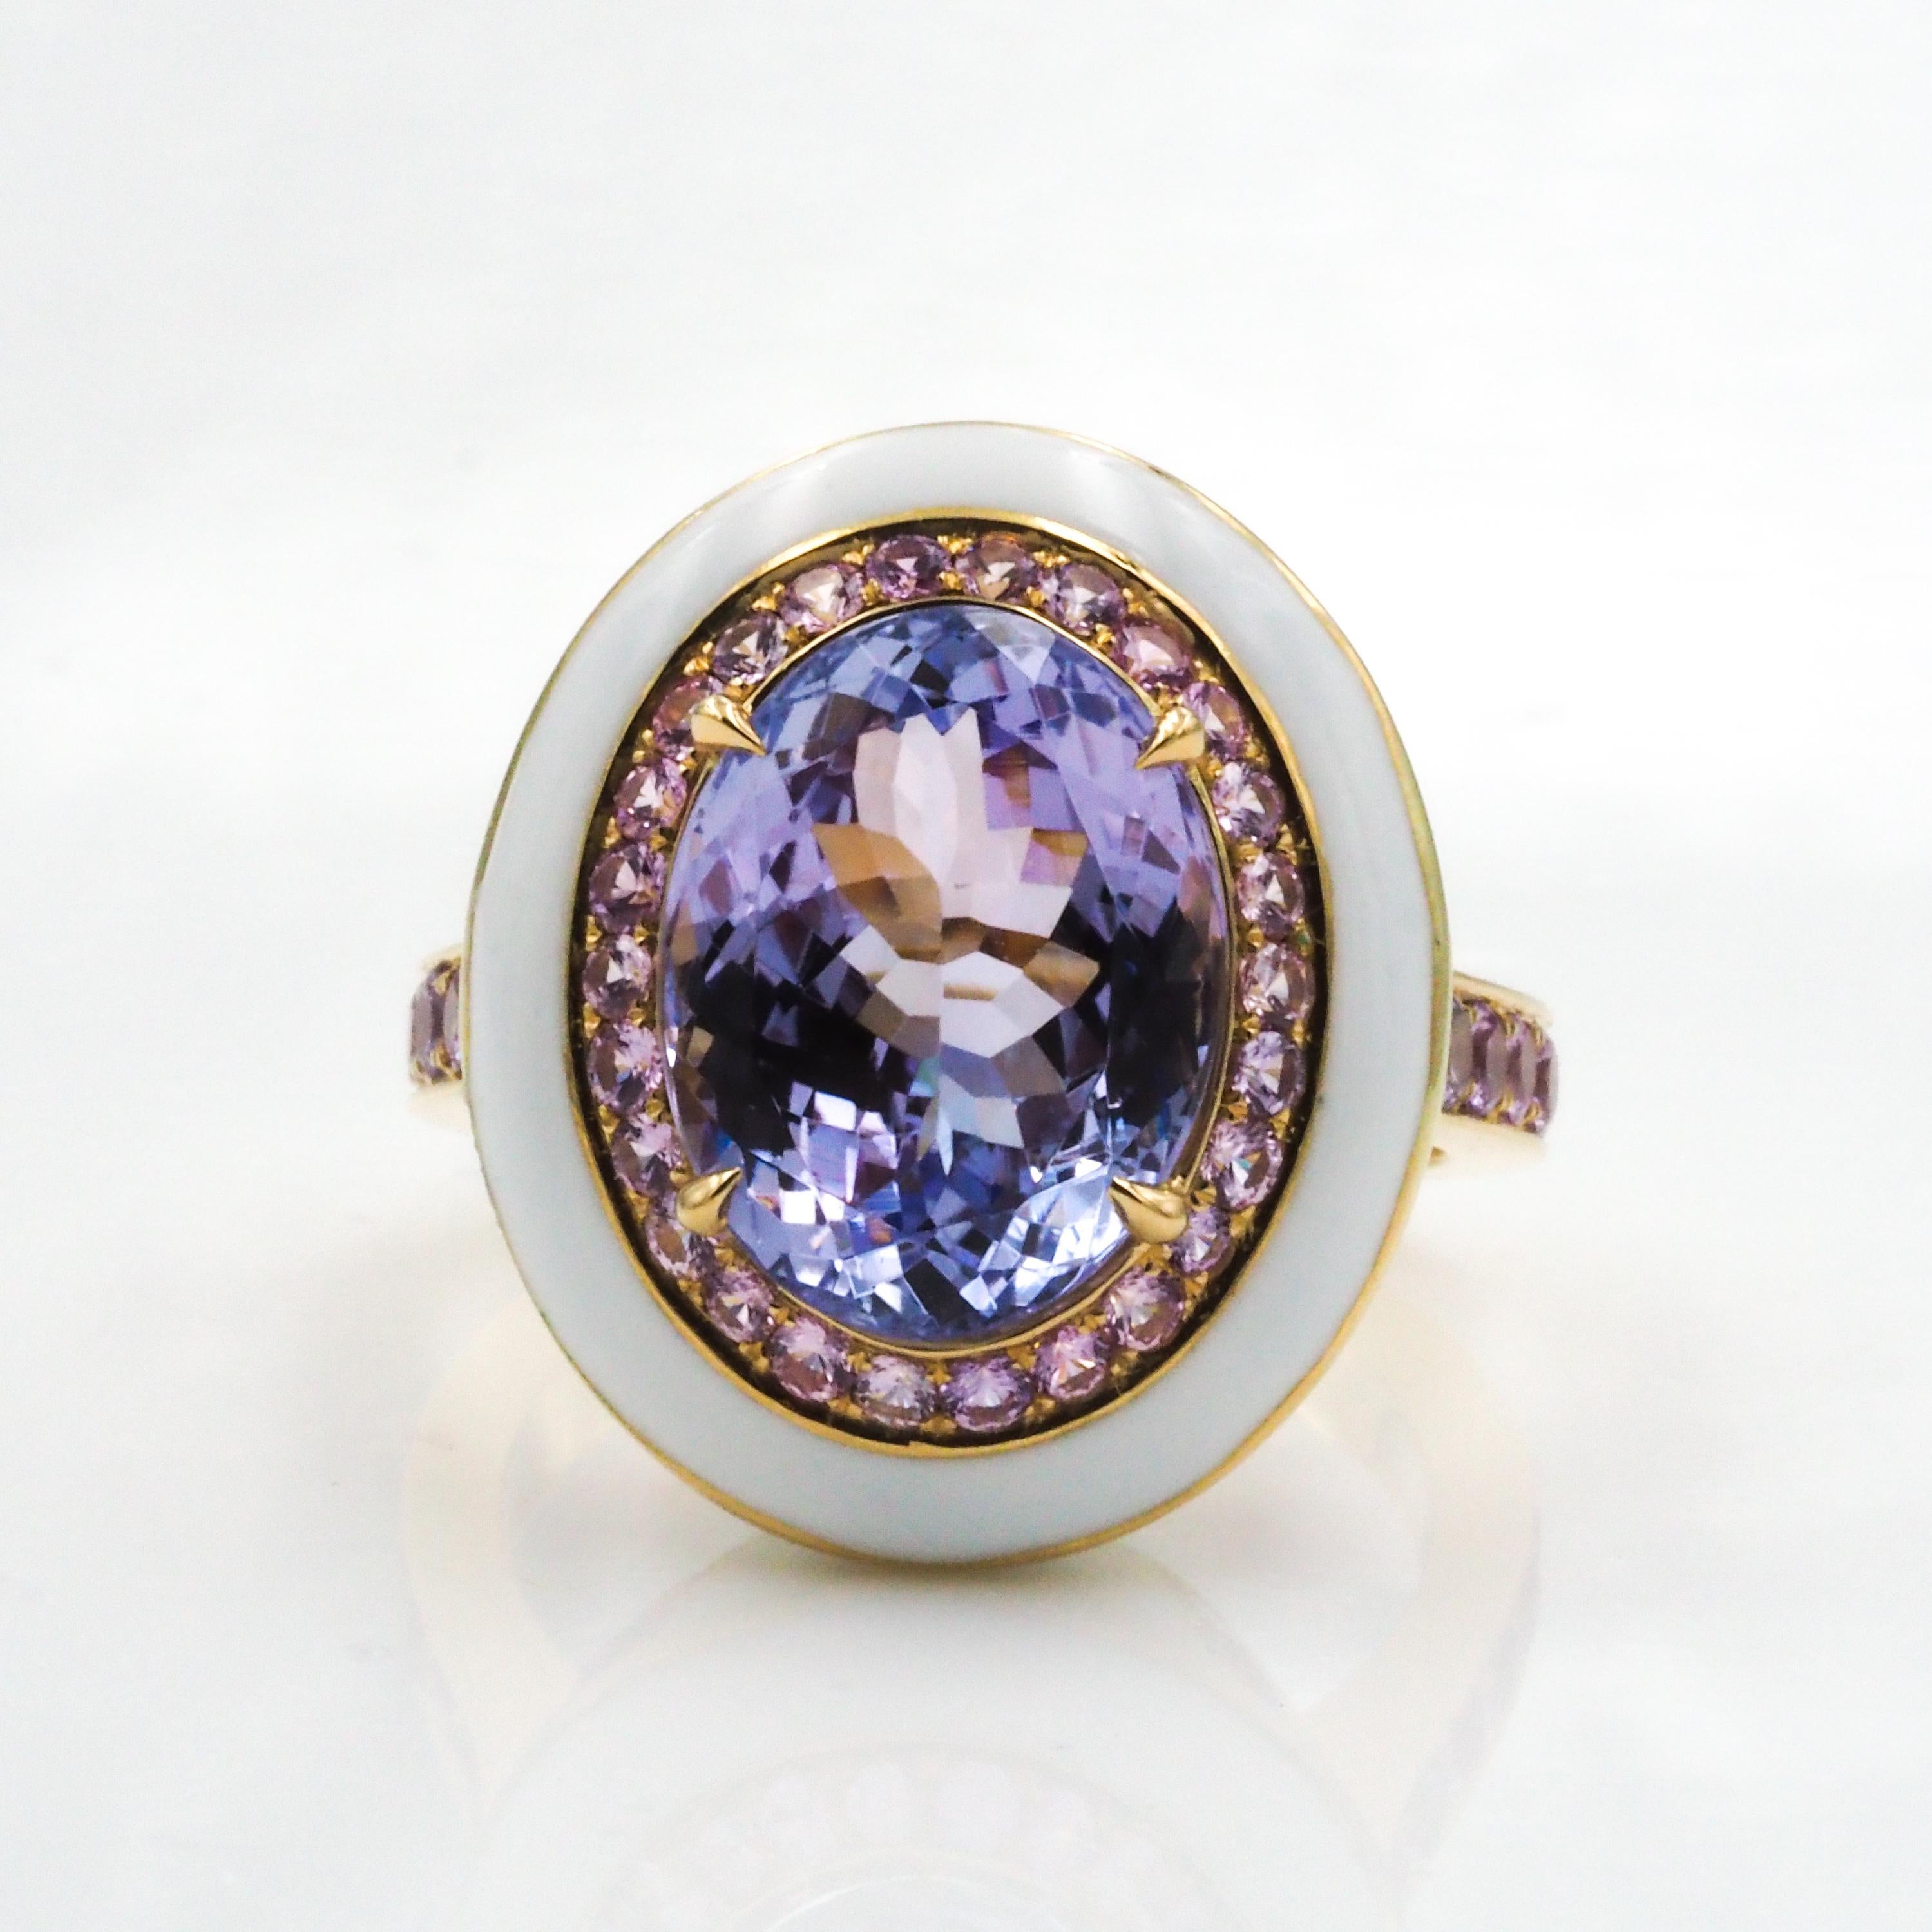 This 18k yellow gold cocktail ring features an oval tanzanite center, surrounded by pink sapphires. The white enamel ceramic enhances the color of the beautiful center stone.

Tanzanite Center: 9.66ct
Pink Sapphires: 1.74ct
Metal: 18k Yellow